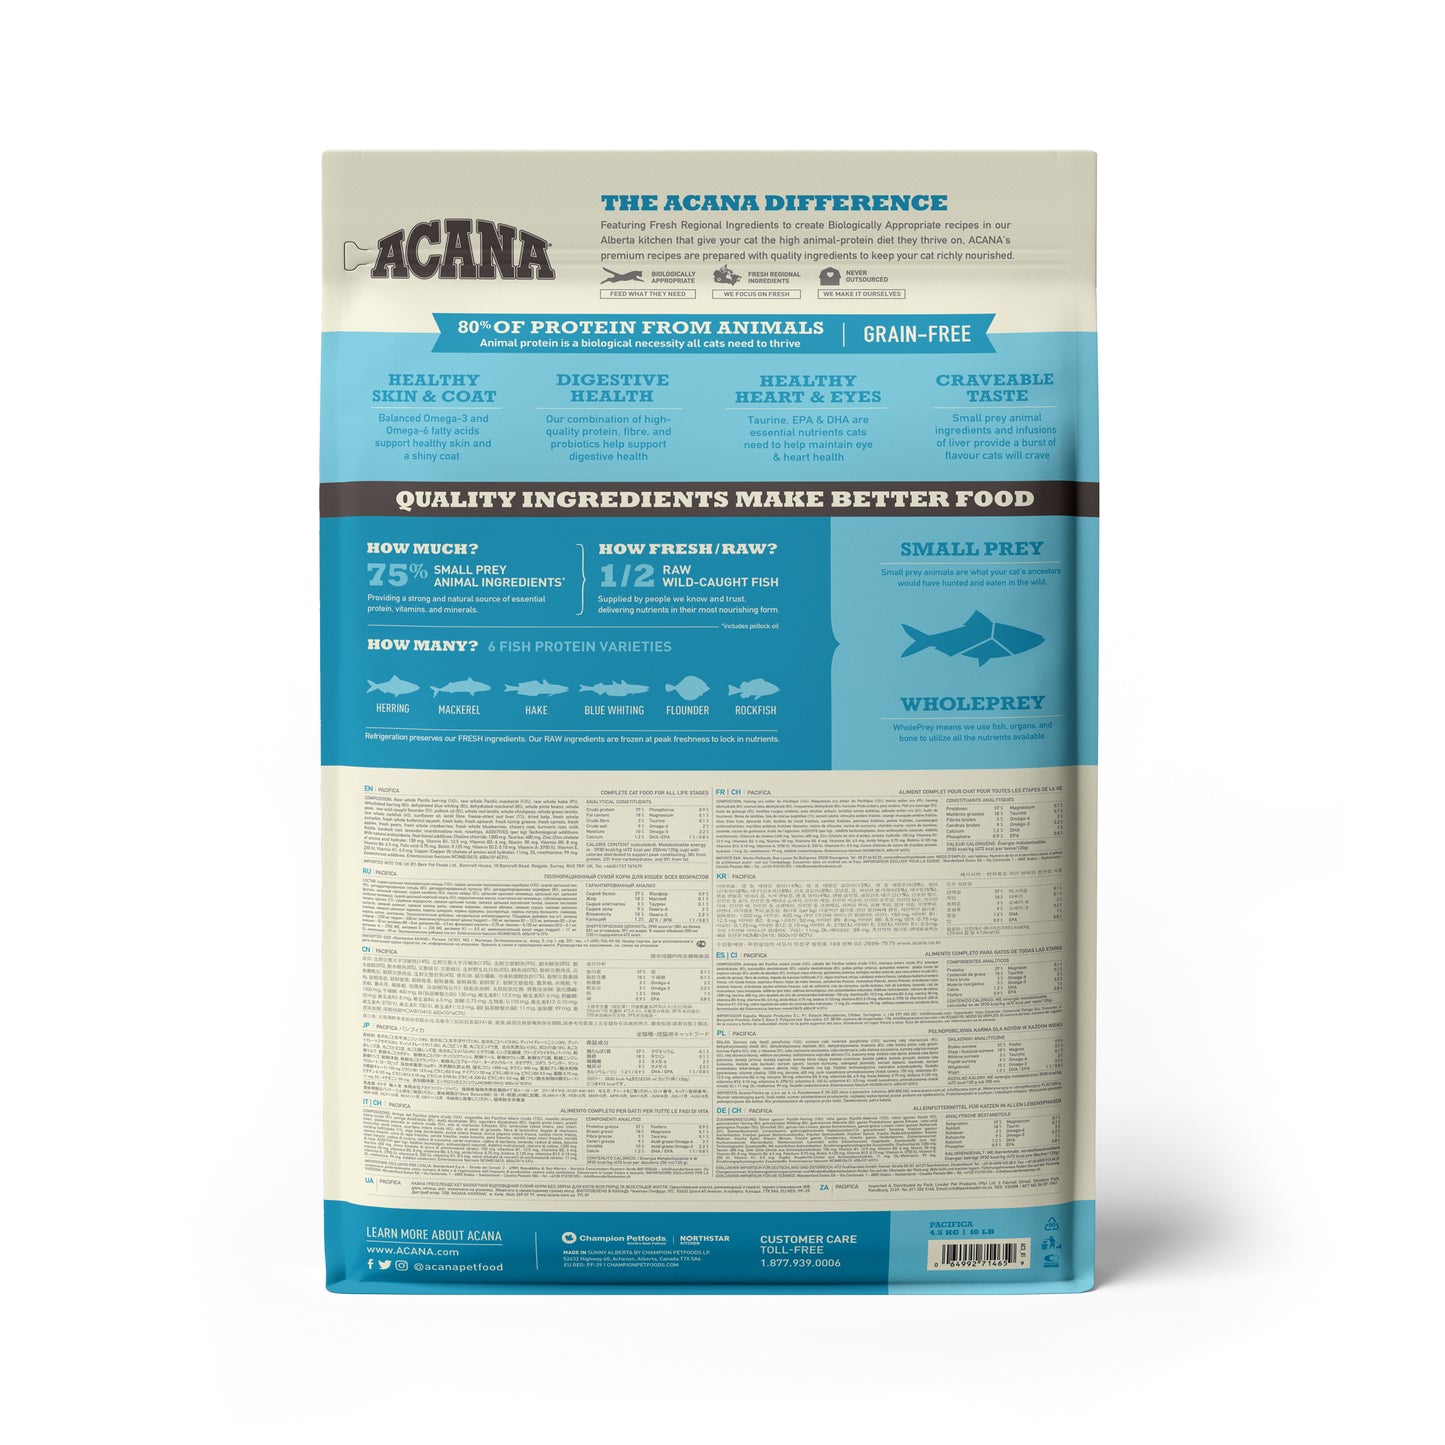 [EXTRA 5% OFF + FREE 340g of Kibbles] ACANA Regionals Pacifica Dry Cat Food (2 Sizes)